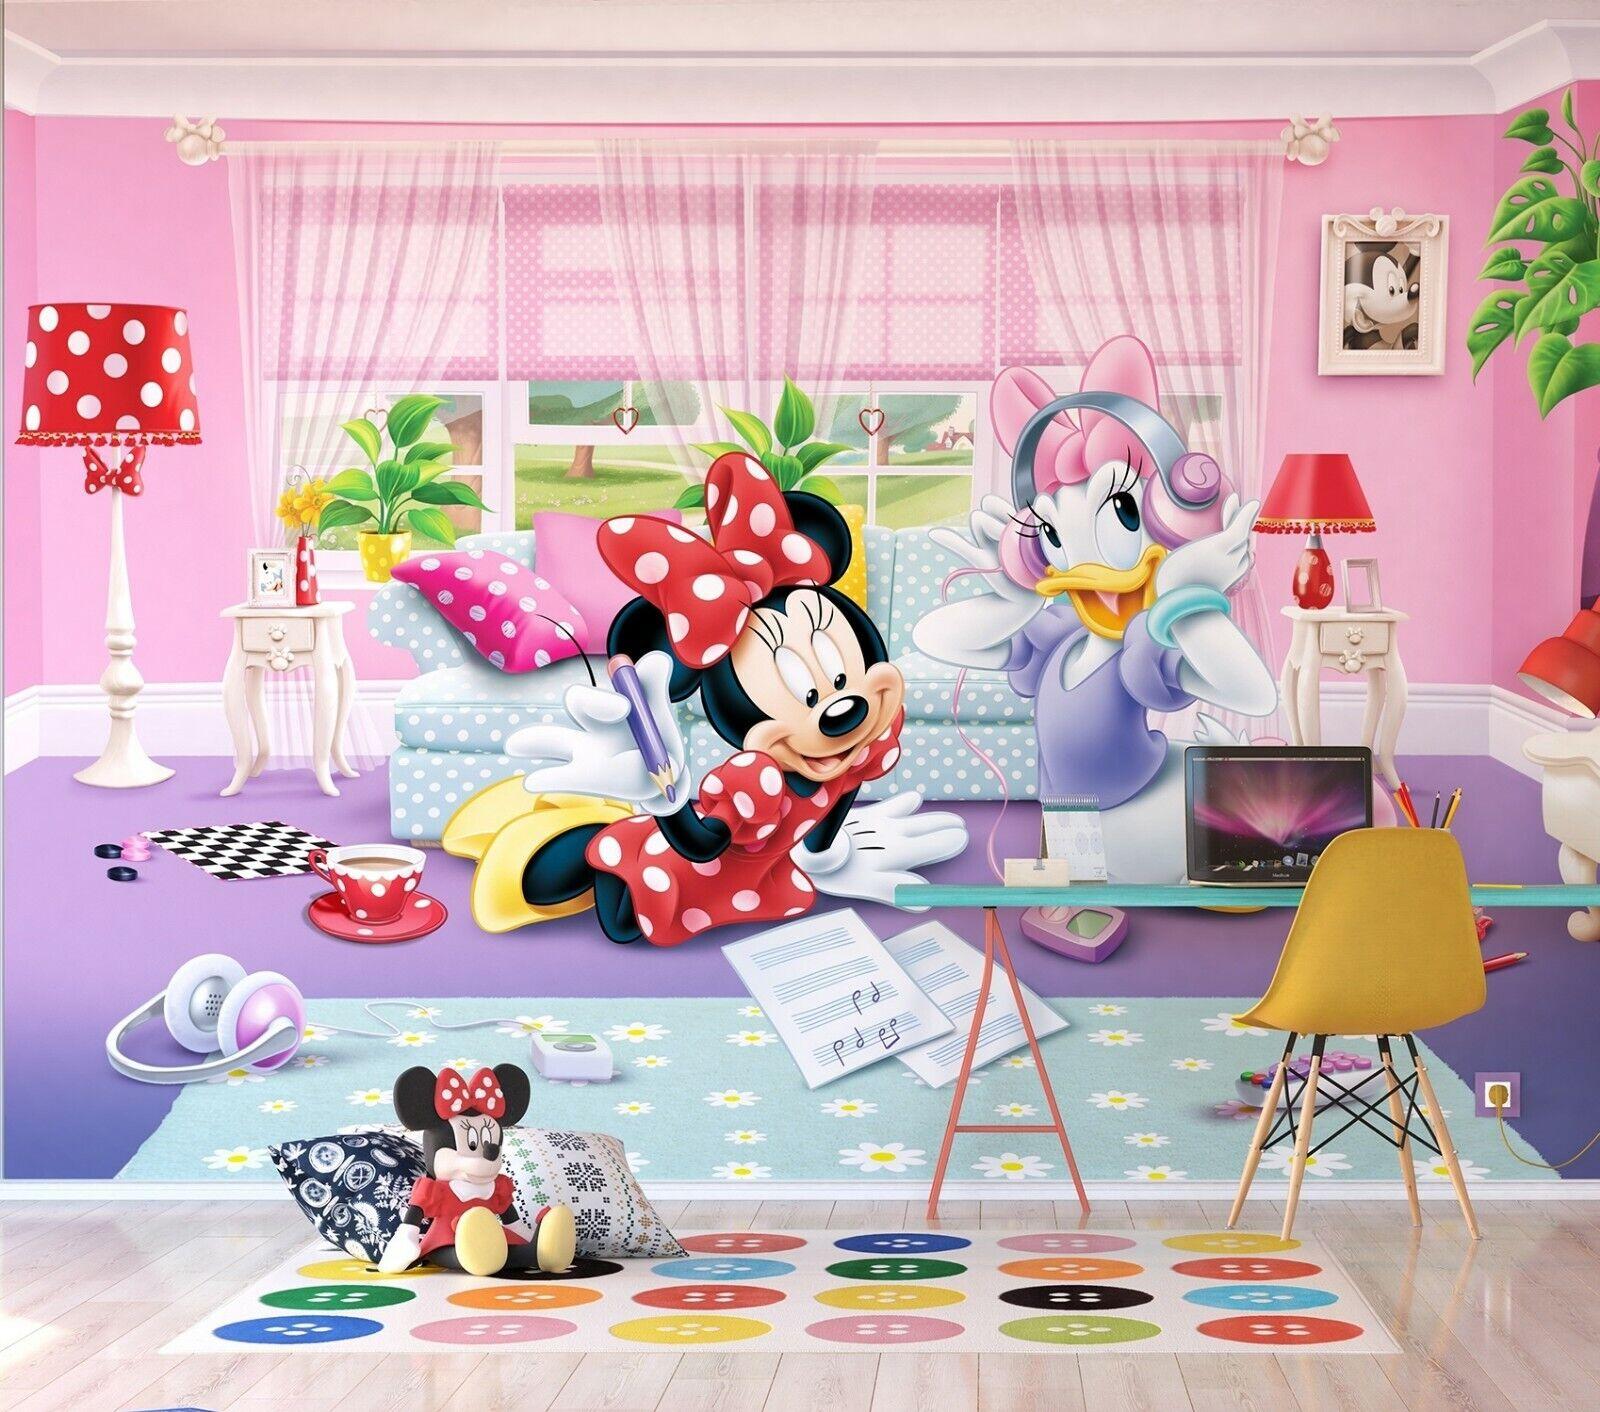 Disney Kids bedroom Wallpaper Minnie Mouse and Daisy photo wall